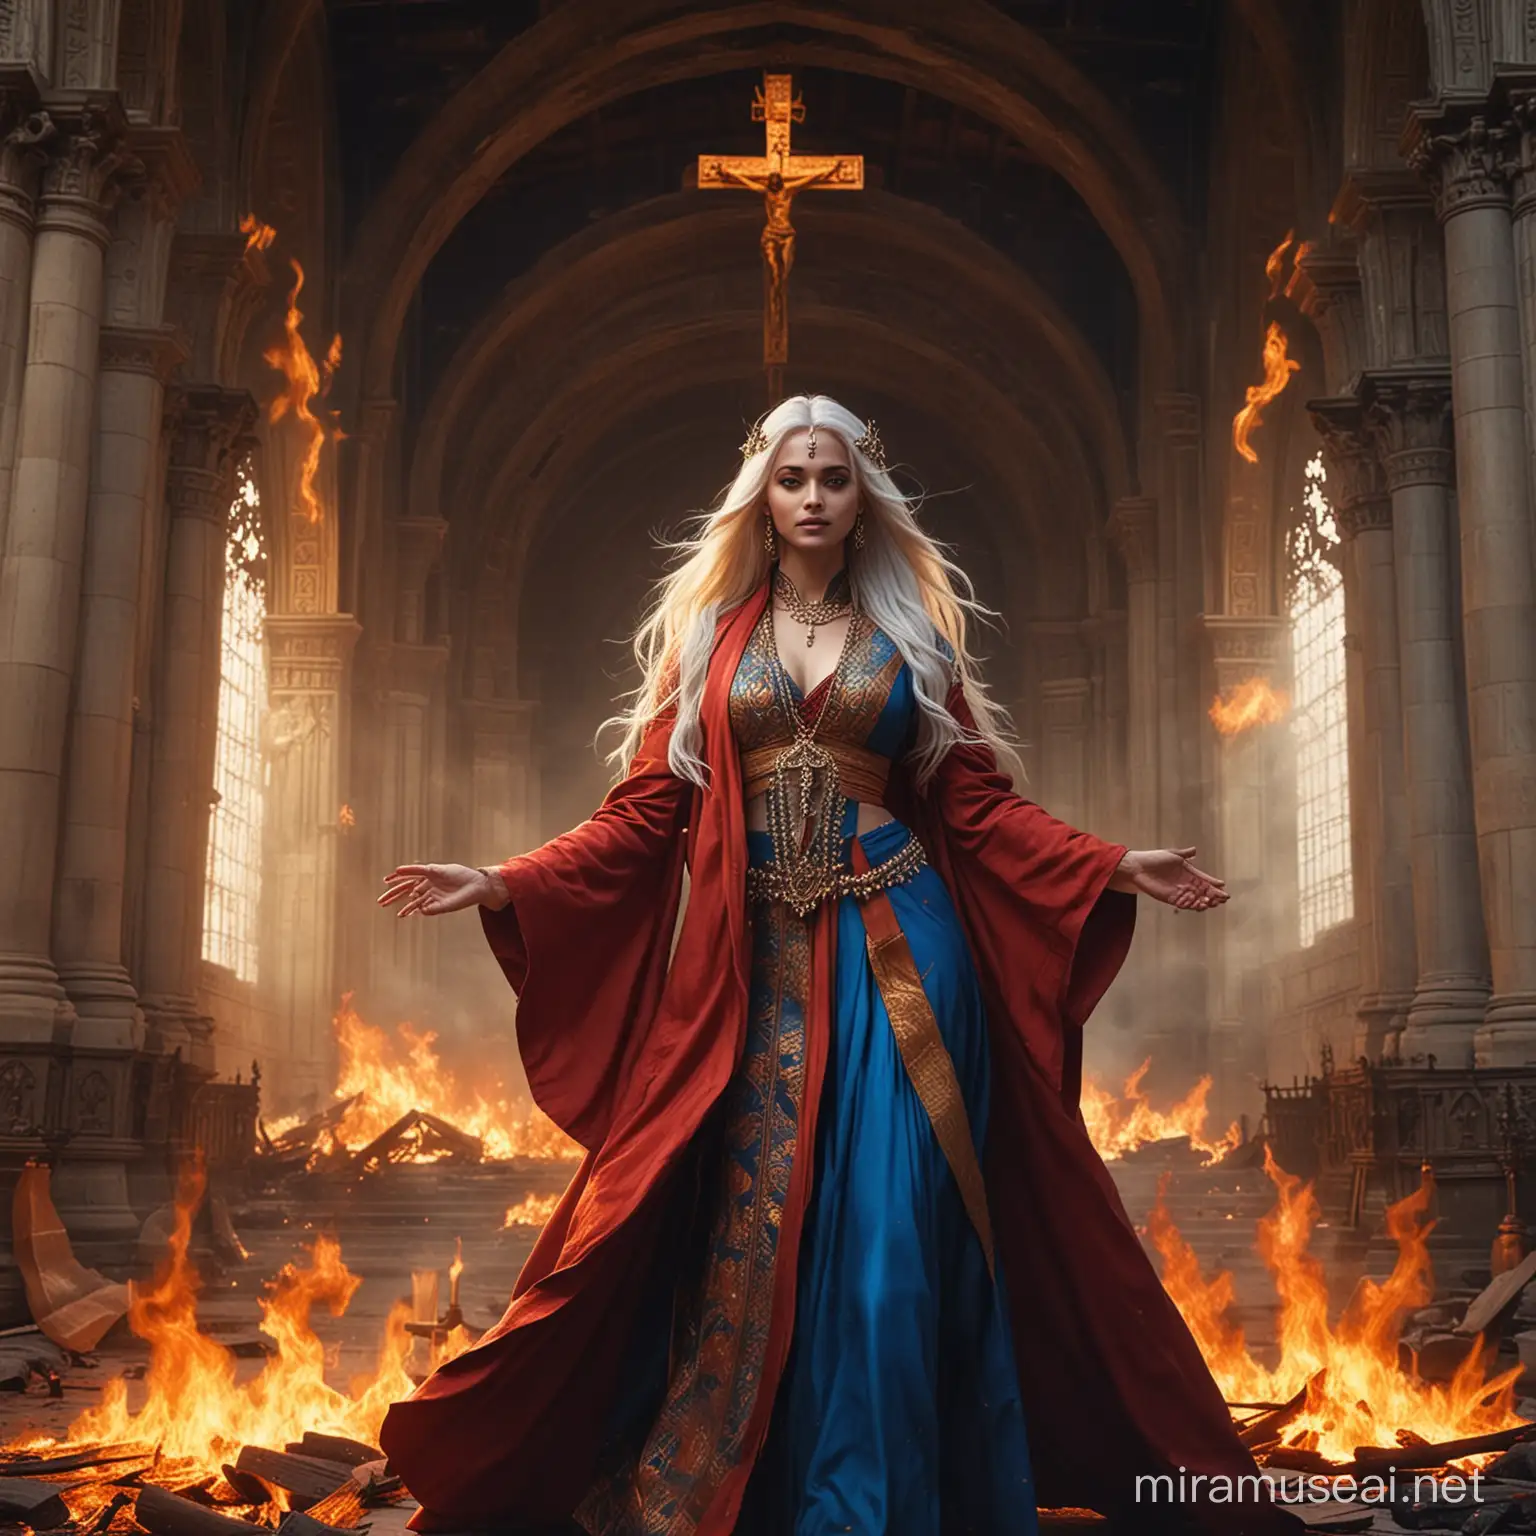 Majestic Teenage Goddess in Ancient Cathedral with Devoted Followers